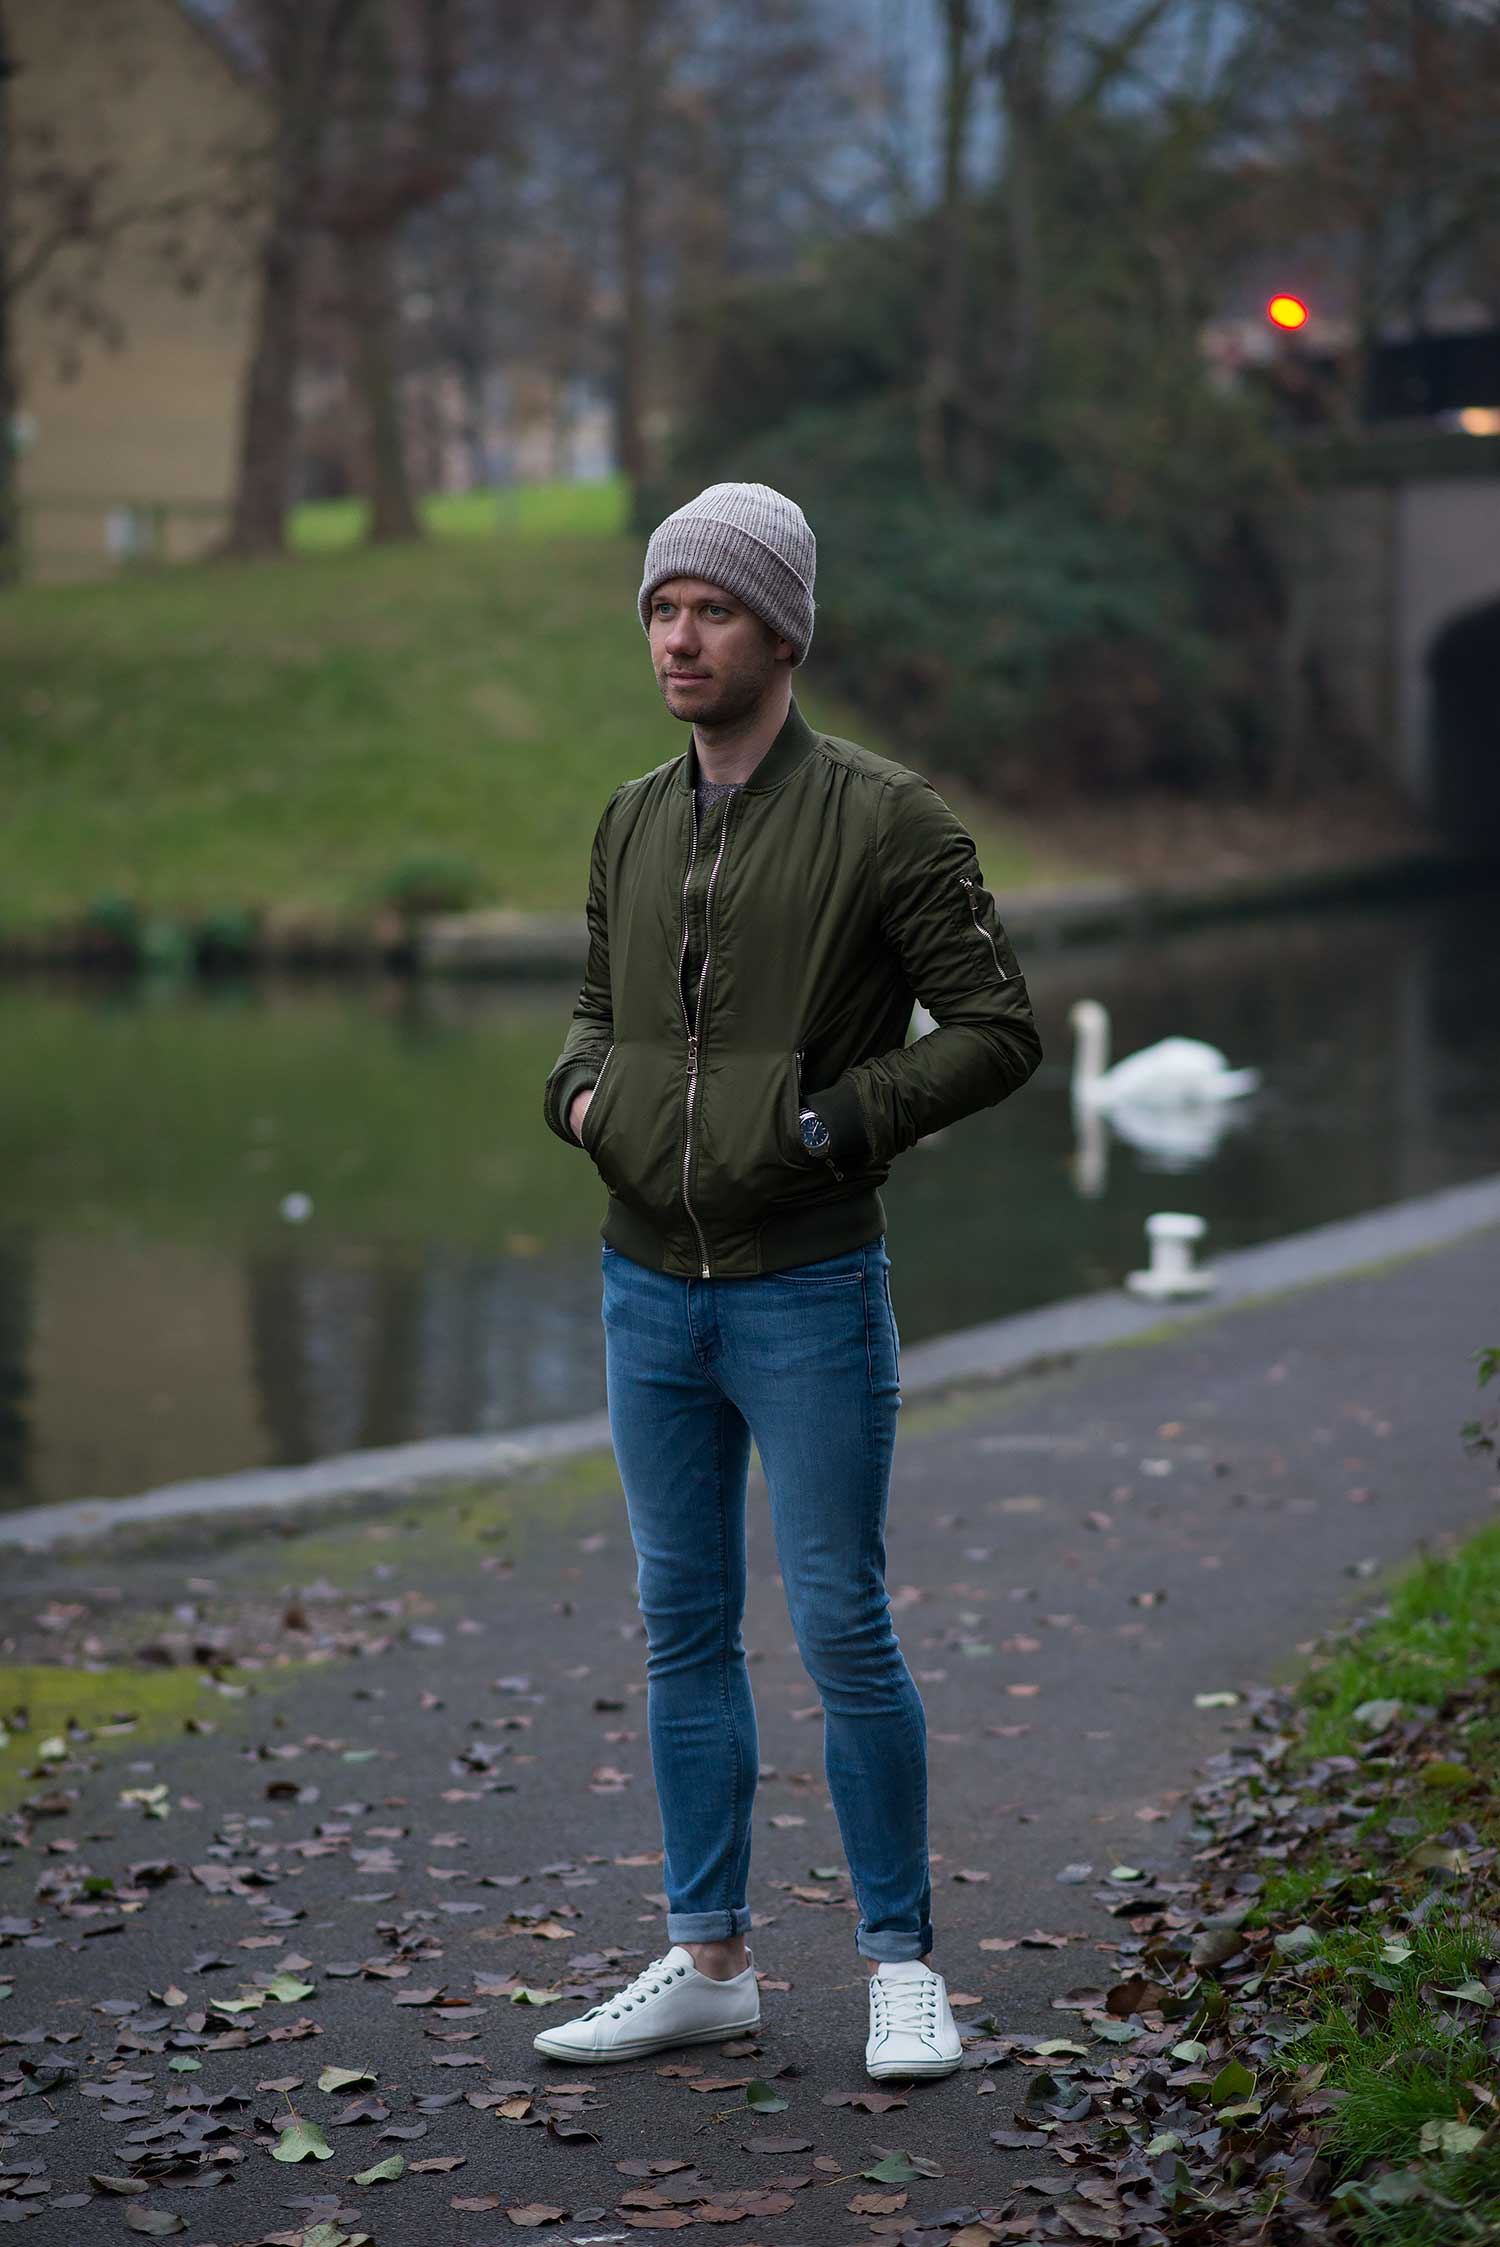 Khaki Bomber Jacket And Skinny Jeans Outfit - Your Average Guy